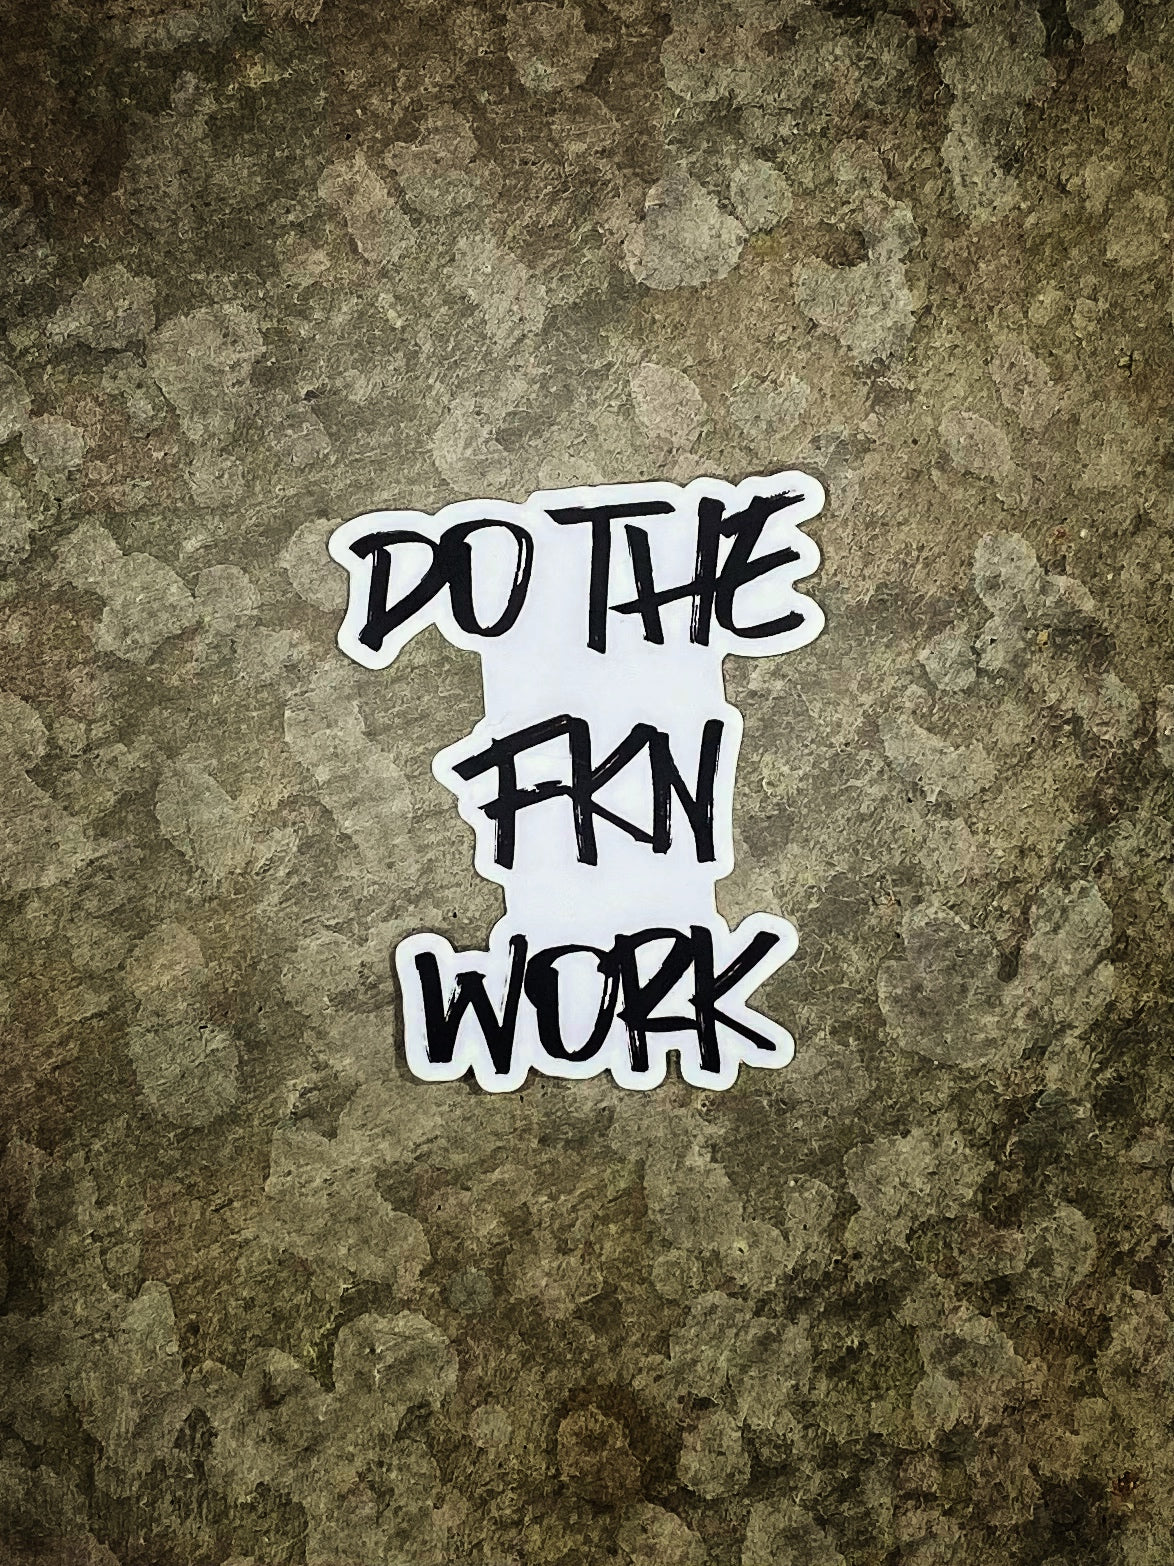 DO THE FKN WORK STICKER - Dude That Lifts